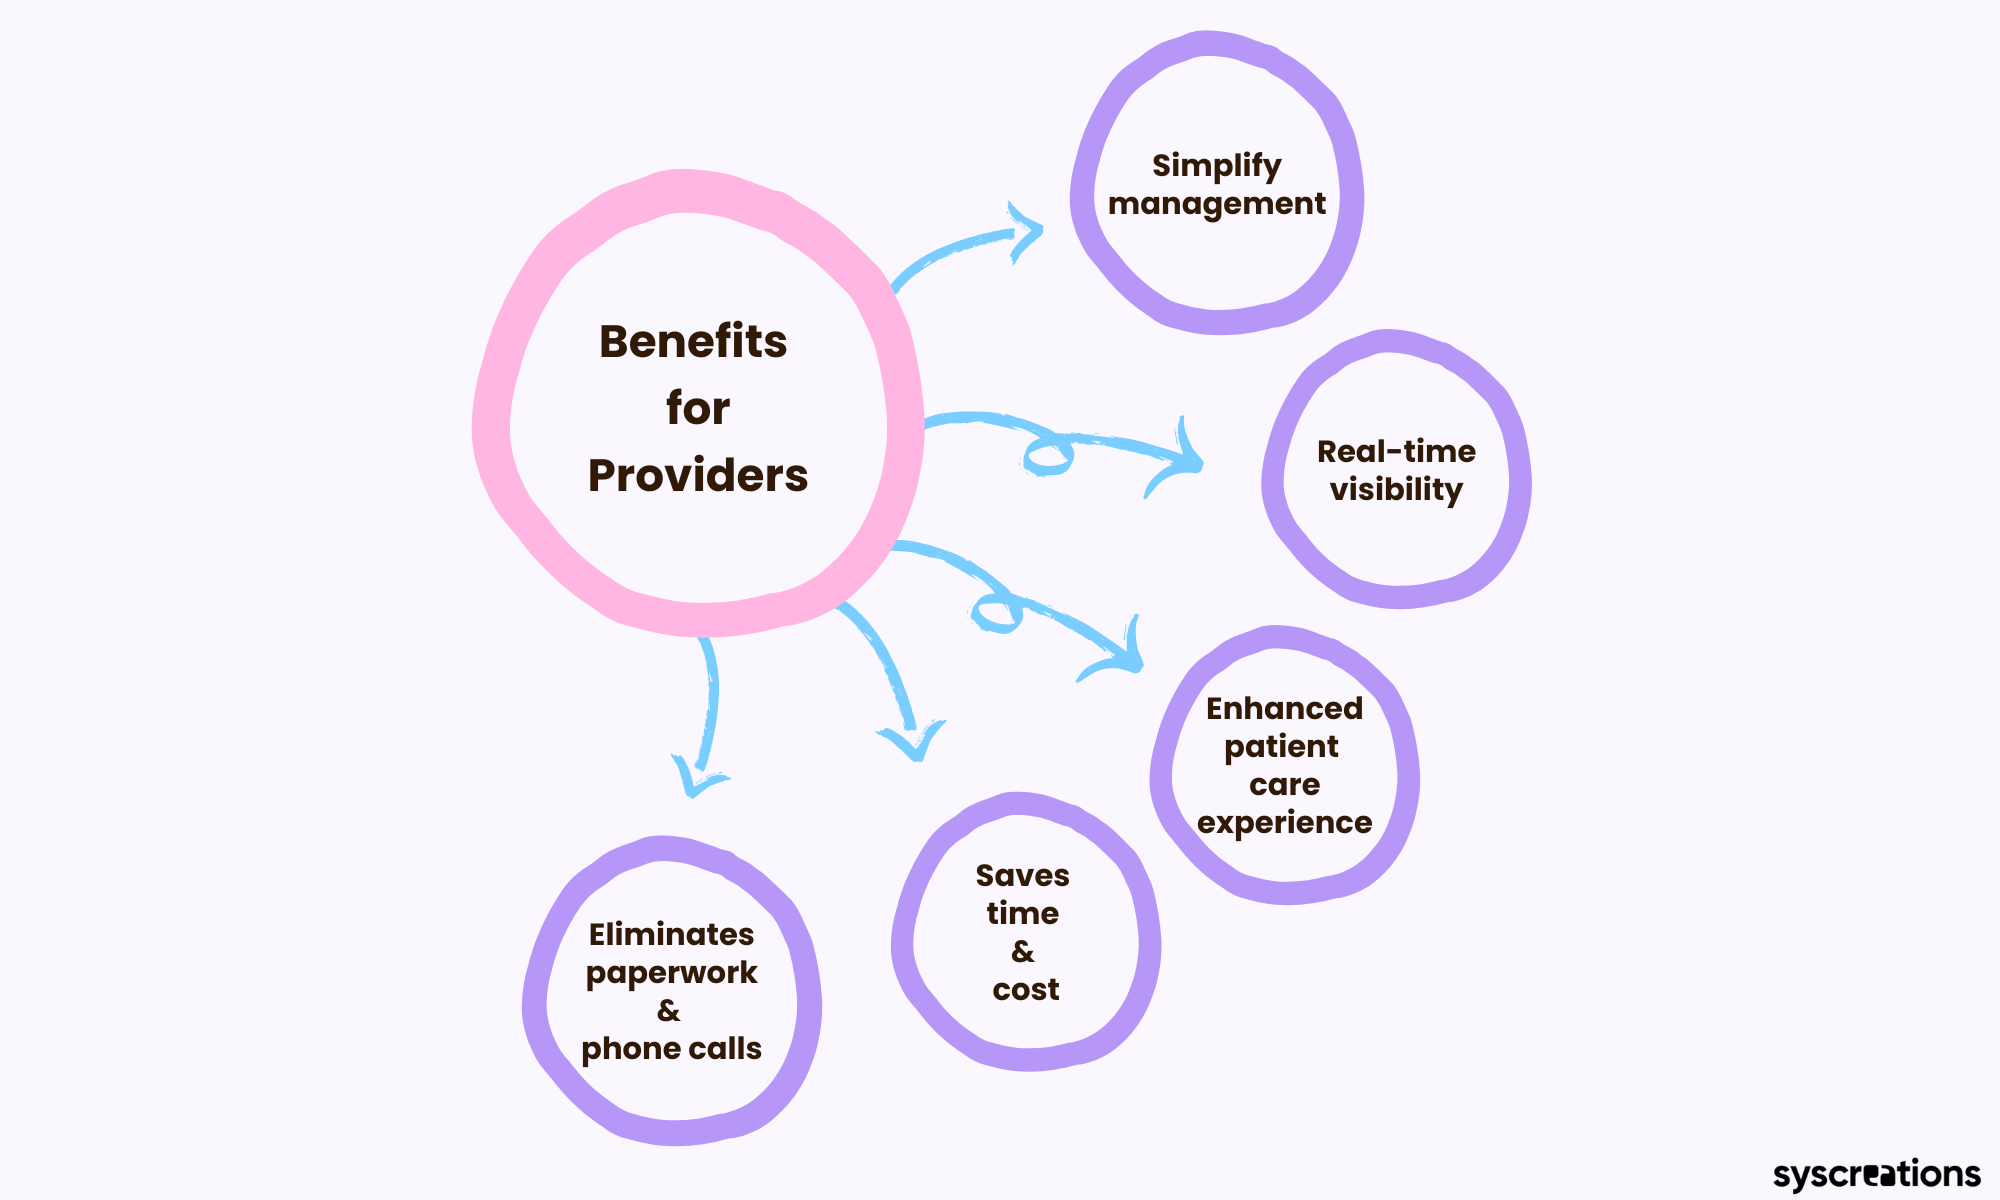 App benefits for providers